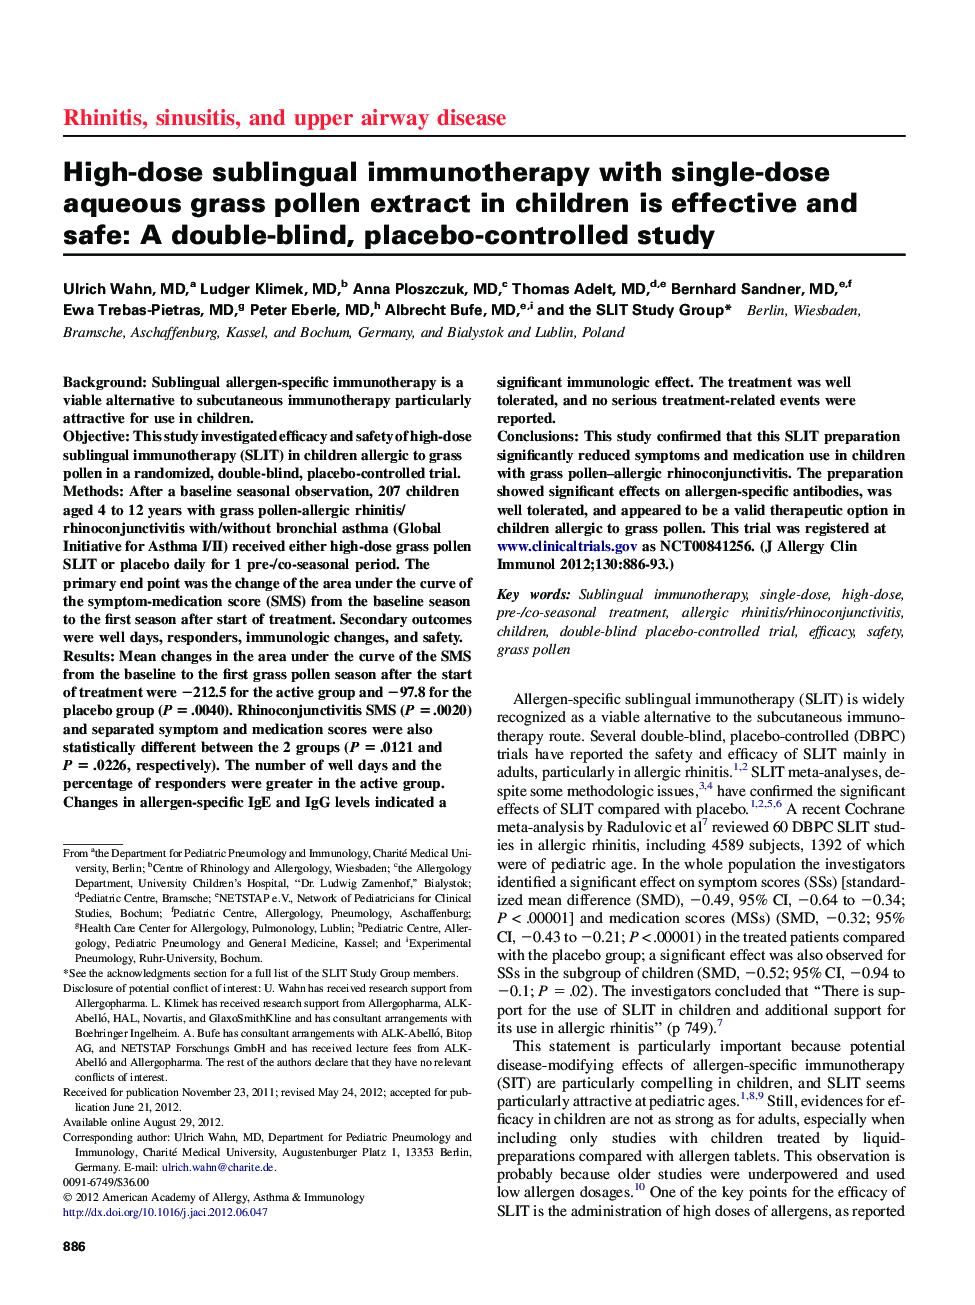 High-dose sublingual immunotherapy with single-dose aqueous grass pollen extract in children is effective and safe: AÂ double-blind, placebo-controlled study